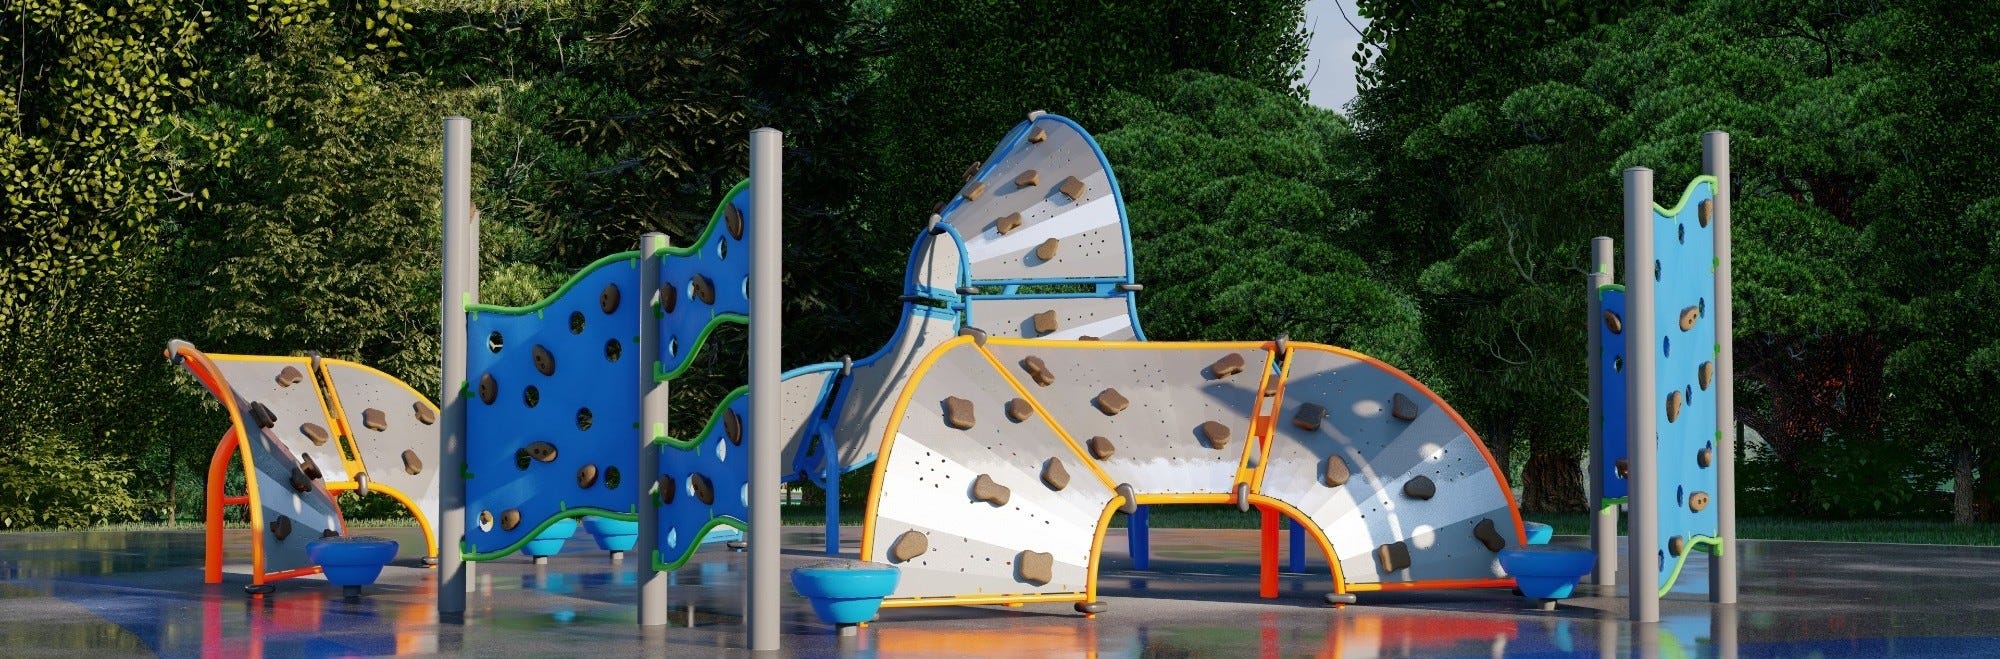 Visualize Your Playground With GameTime Design Tools and Resources